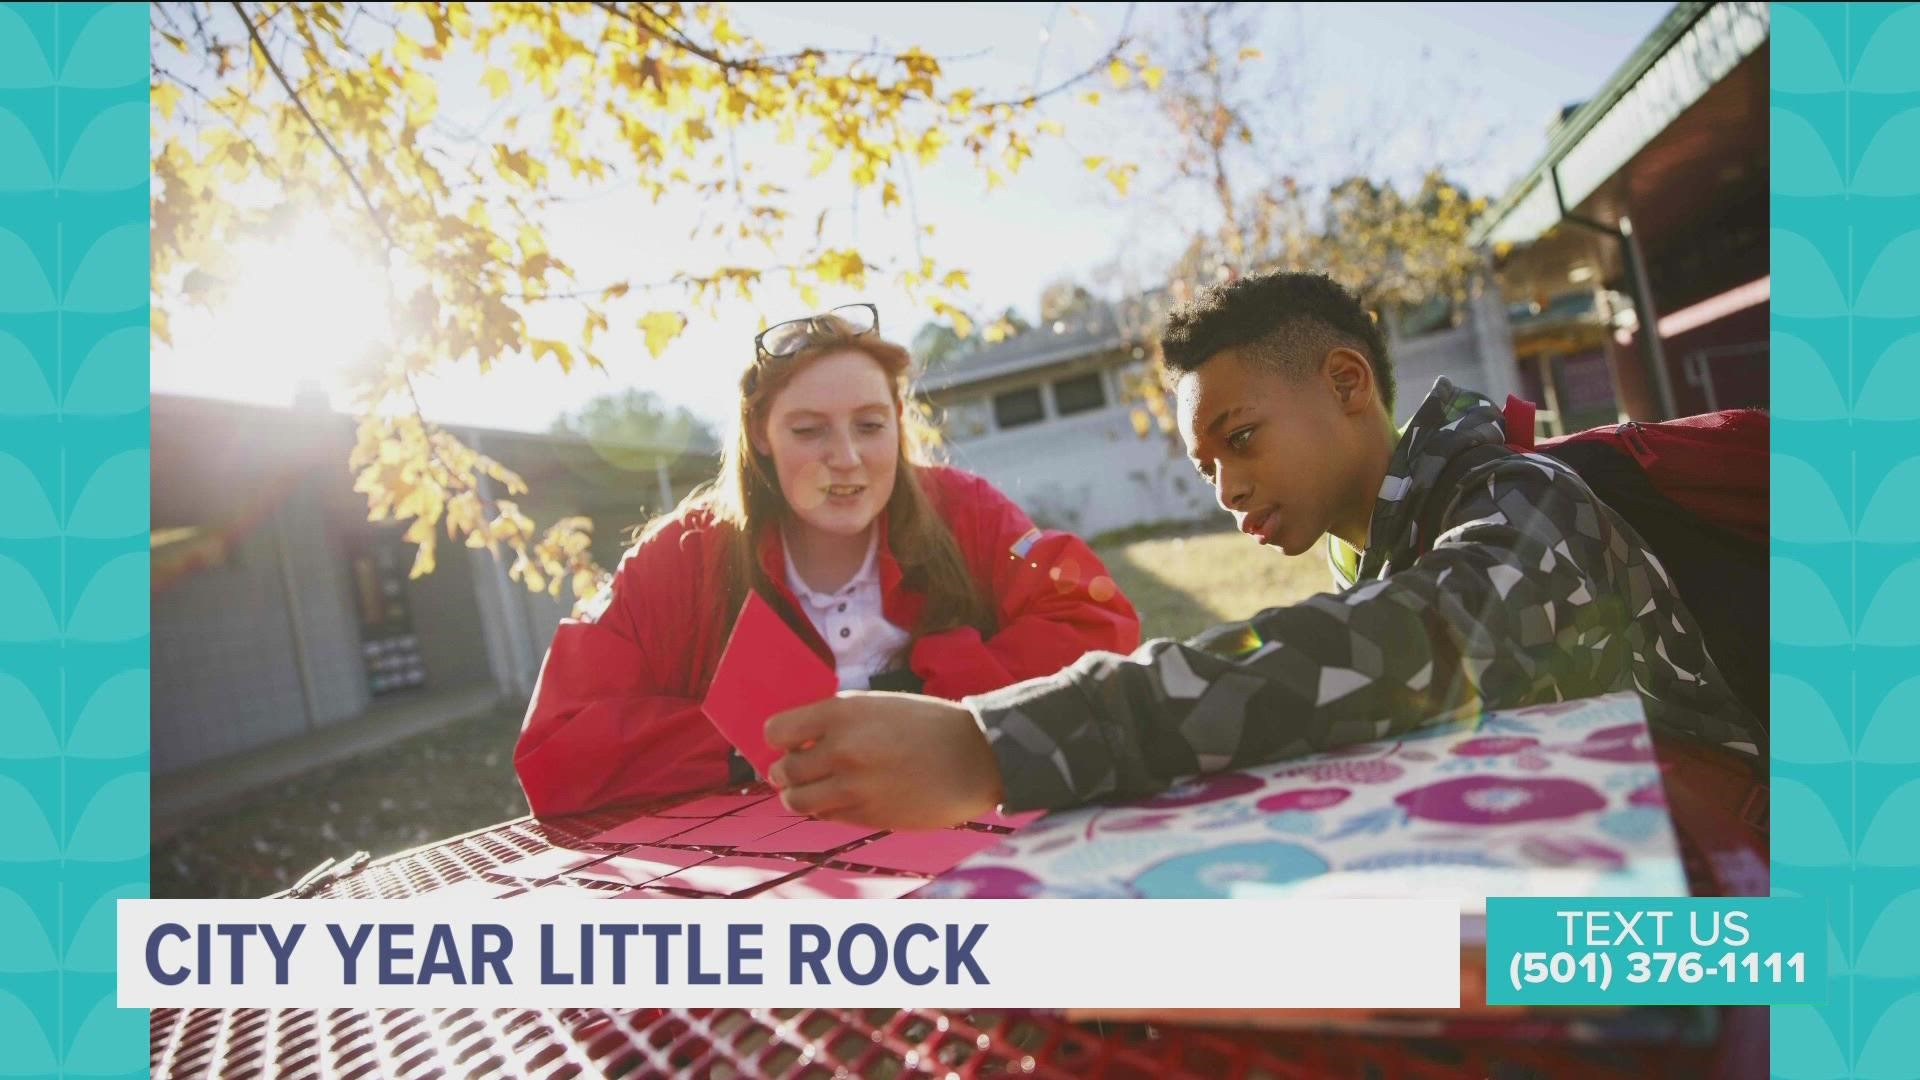 Head to cityyear.org/little-rock/ to learn more.